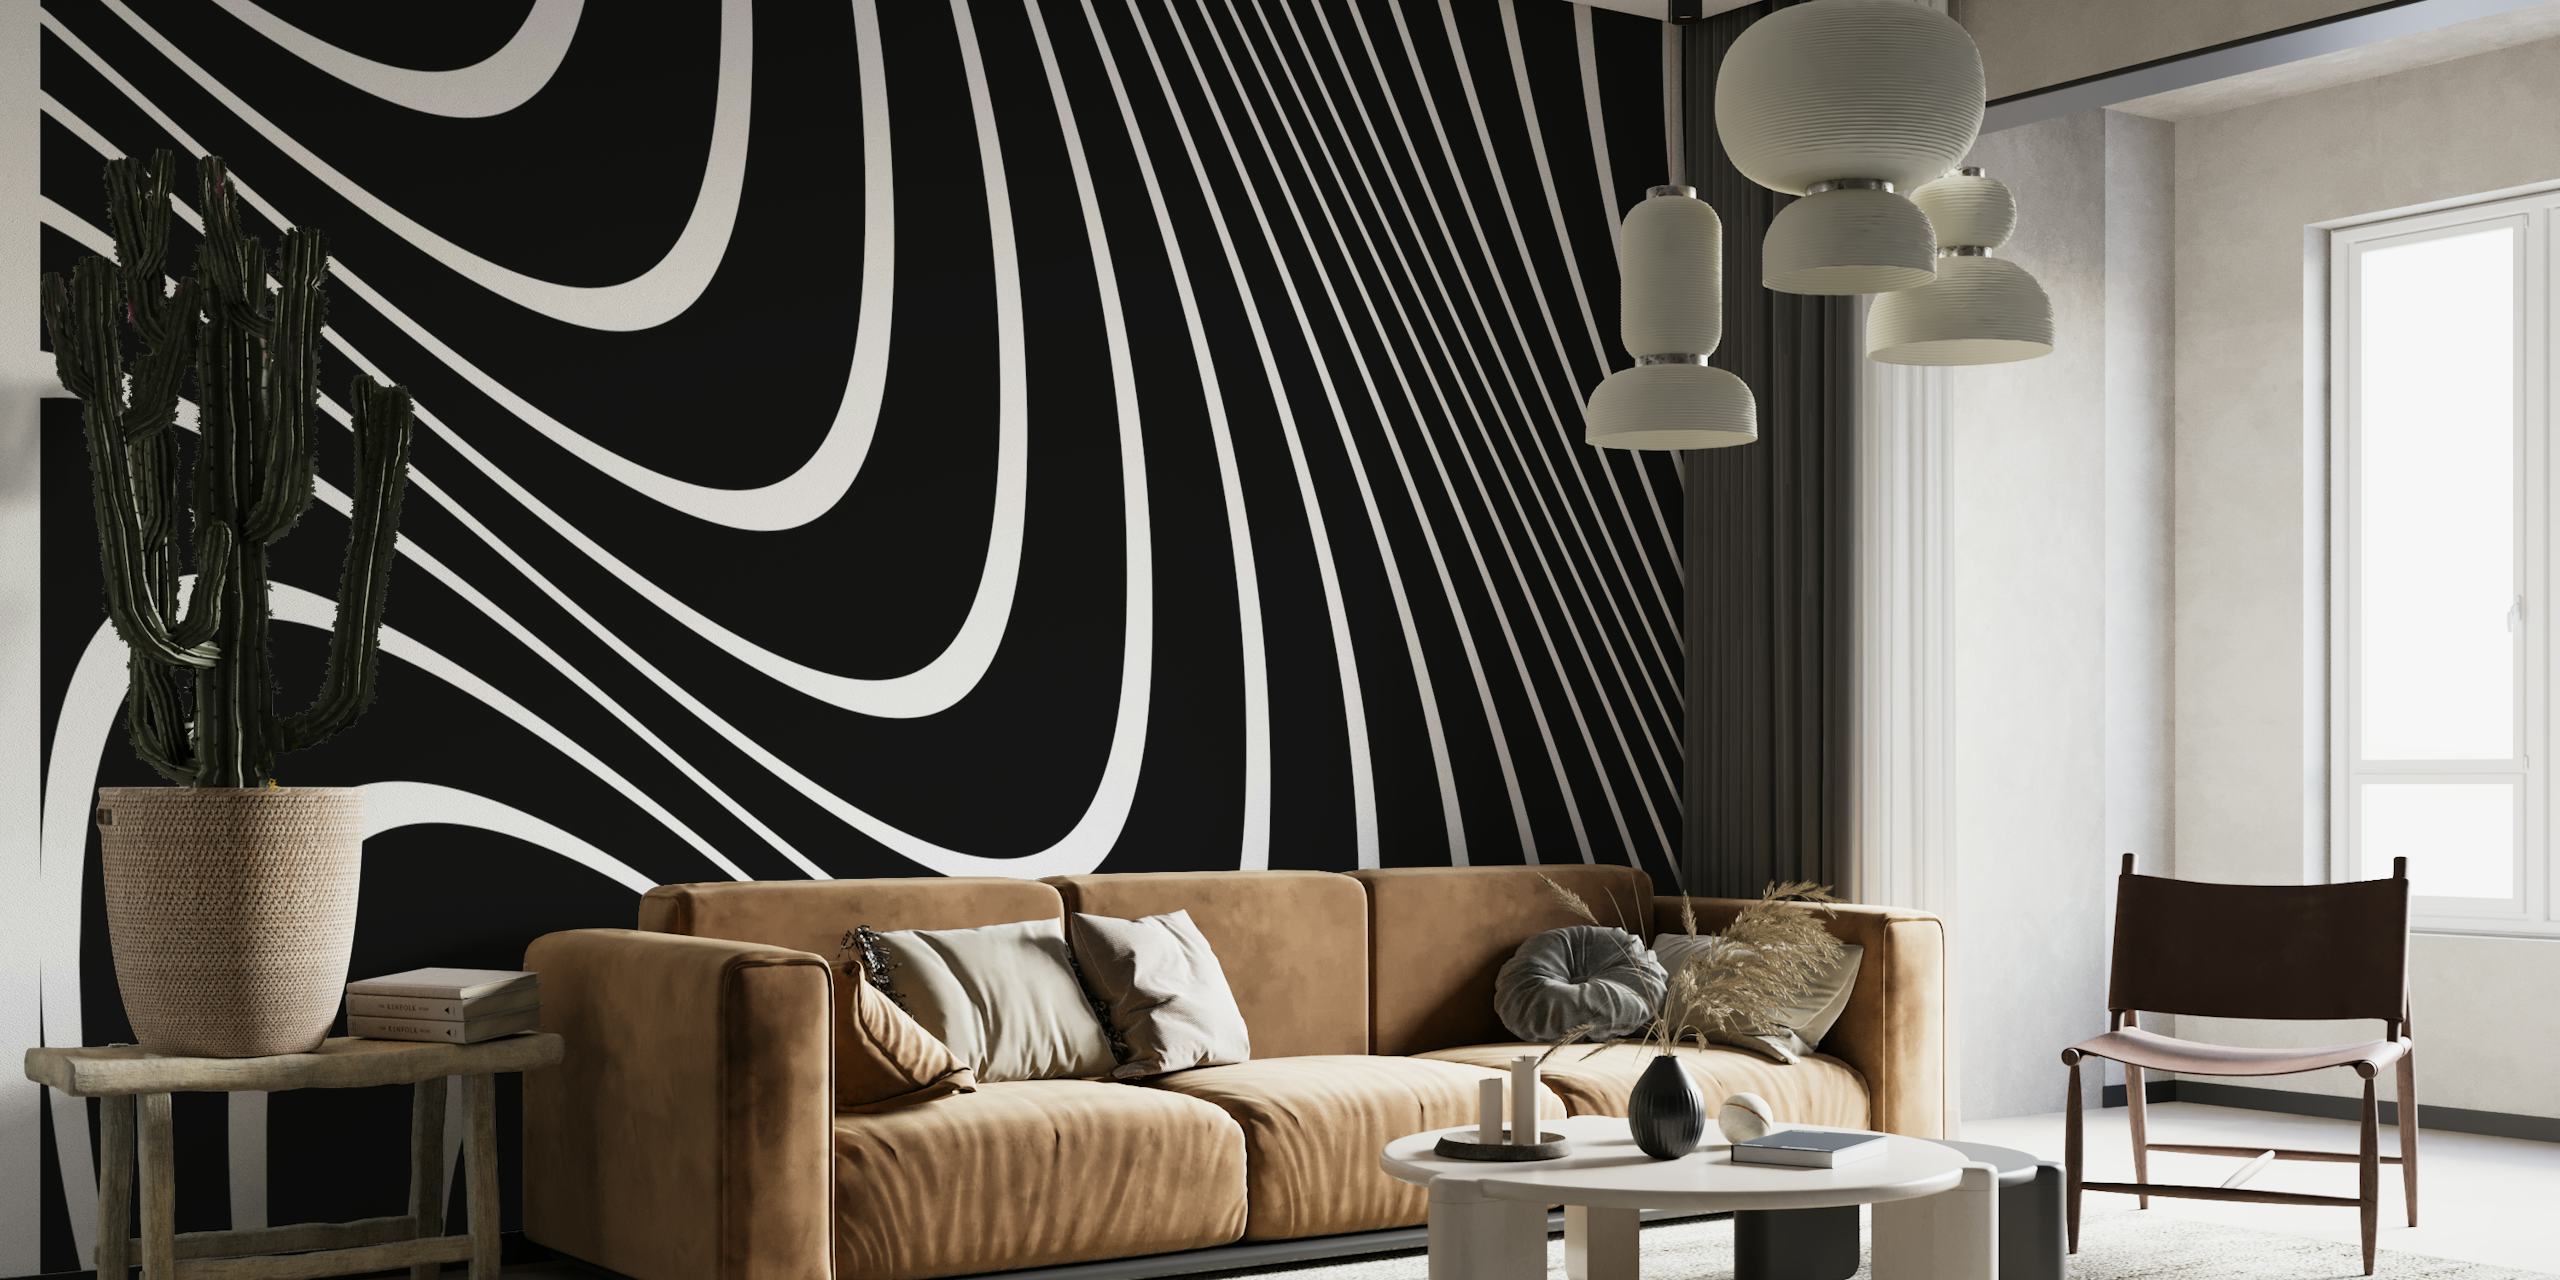 Abstract black and white lines mural for modern wall decor